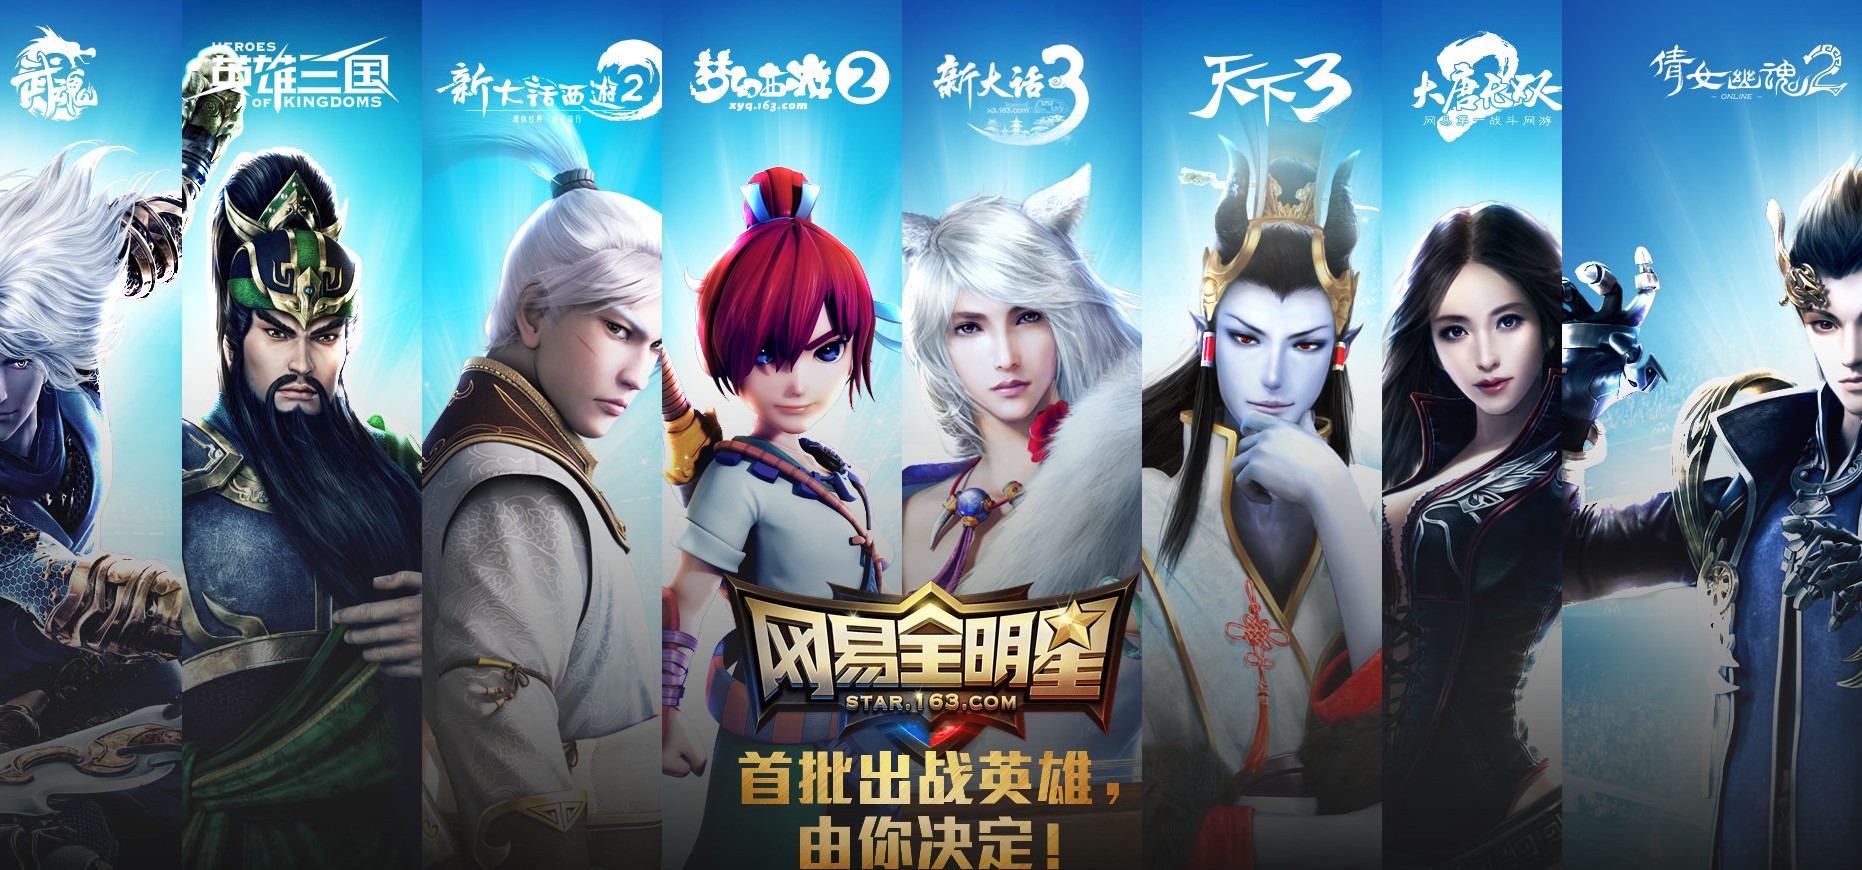 Netease all stars: một “Heroes of the storm” của Trung Quốc